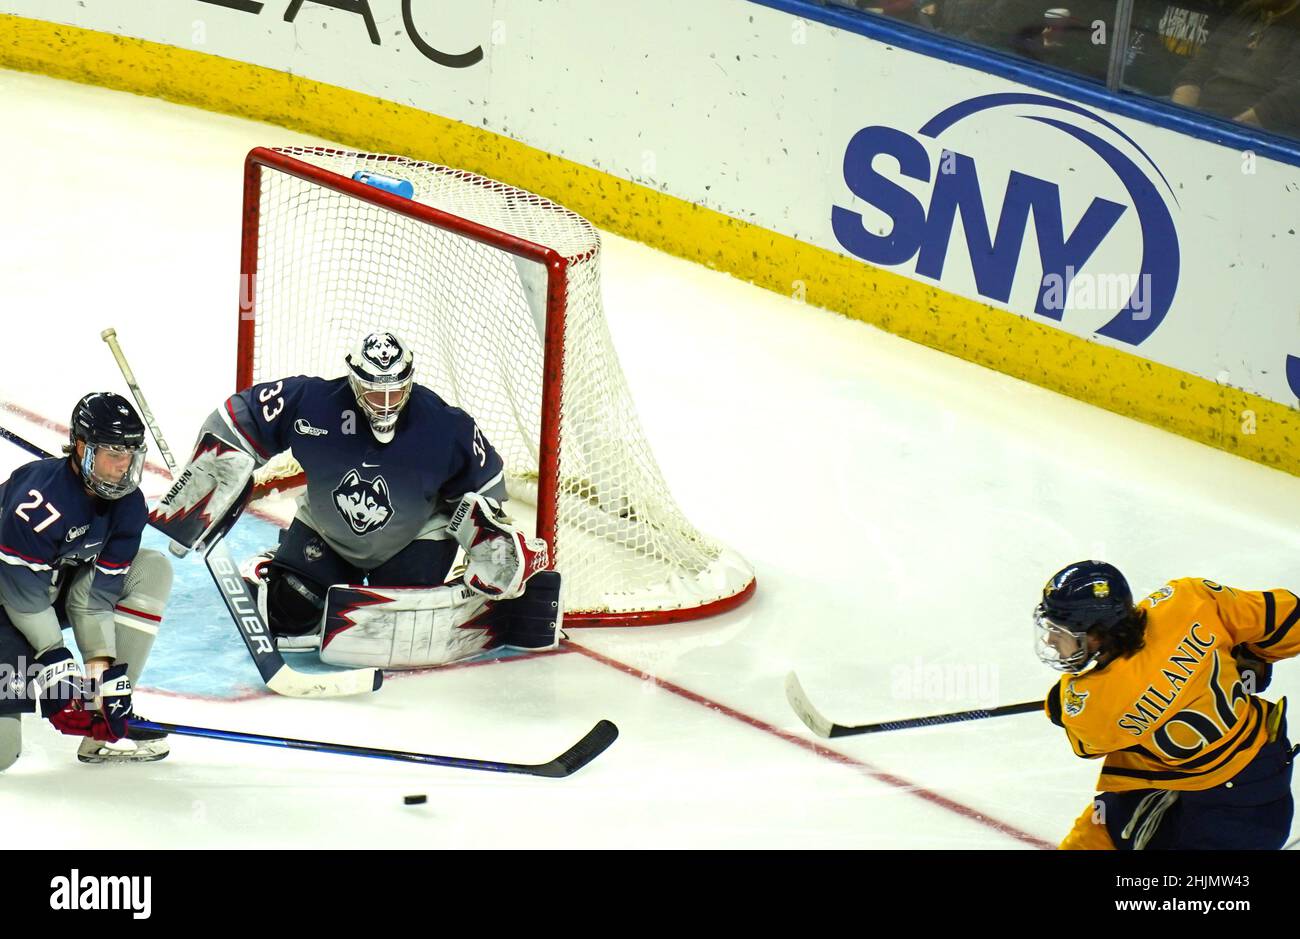 Bridgeport, CT, USA. 30th Jan, 2022. January 30, 2022:UConn goalie Darion Hanson makes one of his 25 saves in a loss to 2nd ranked Quinnipiac 2-0 in the SNY Connecticut Ice tournament at the Webster Bank Arena in Bridgeport, Connecticut on January 30, 2022. Dan Heary Eclipse SportswireCSM/Alamy Live News Stock Photo